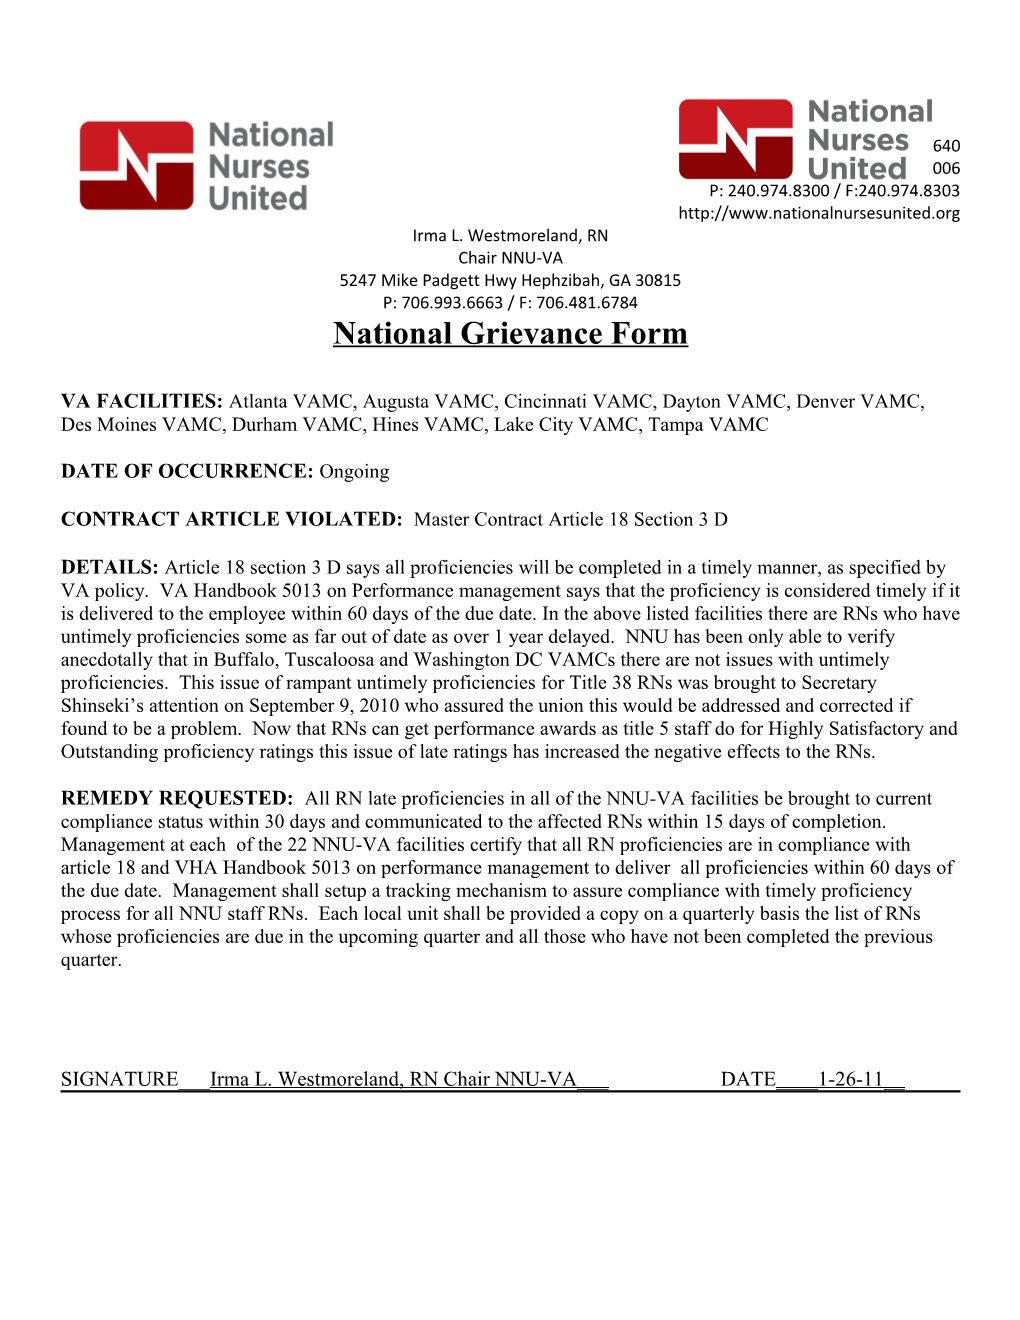 National Grievance Form